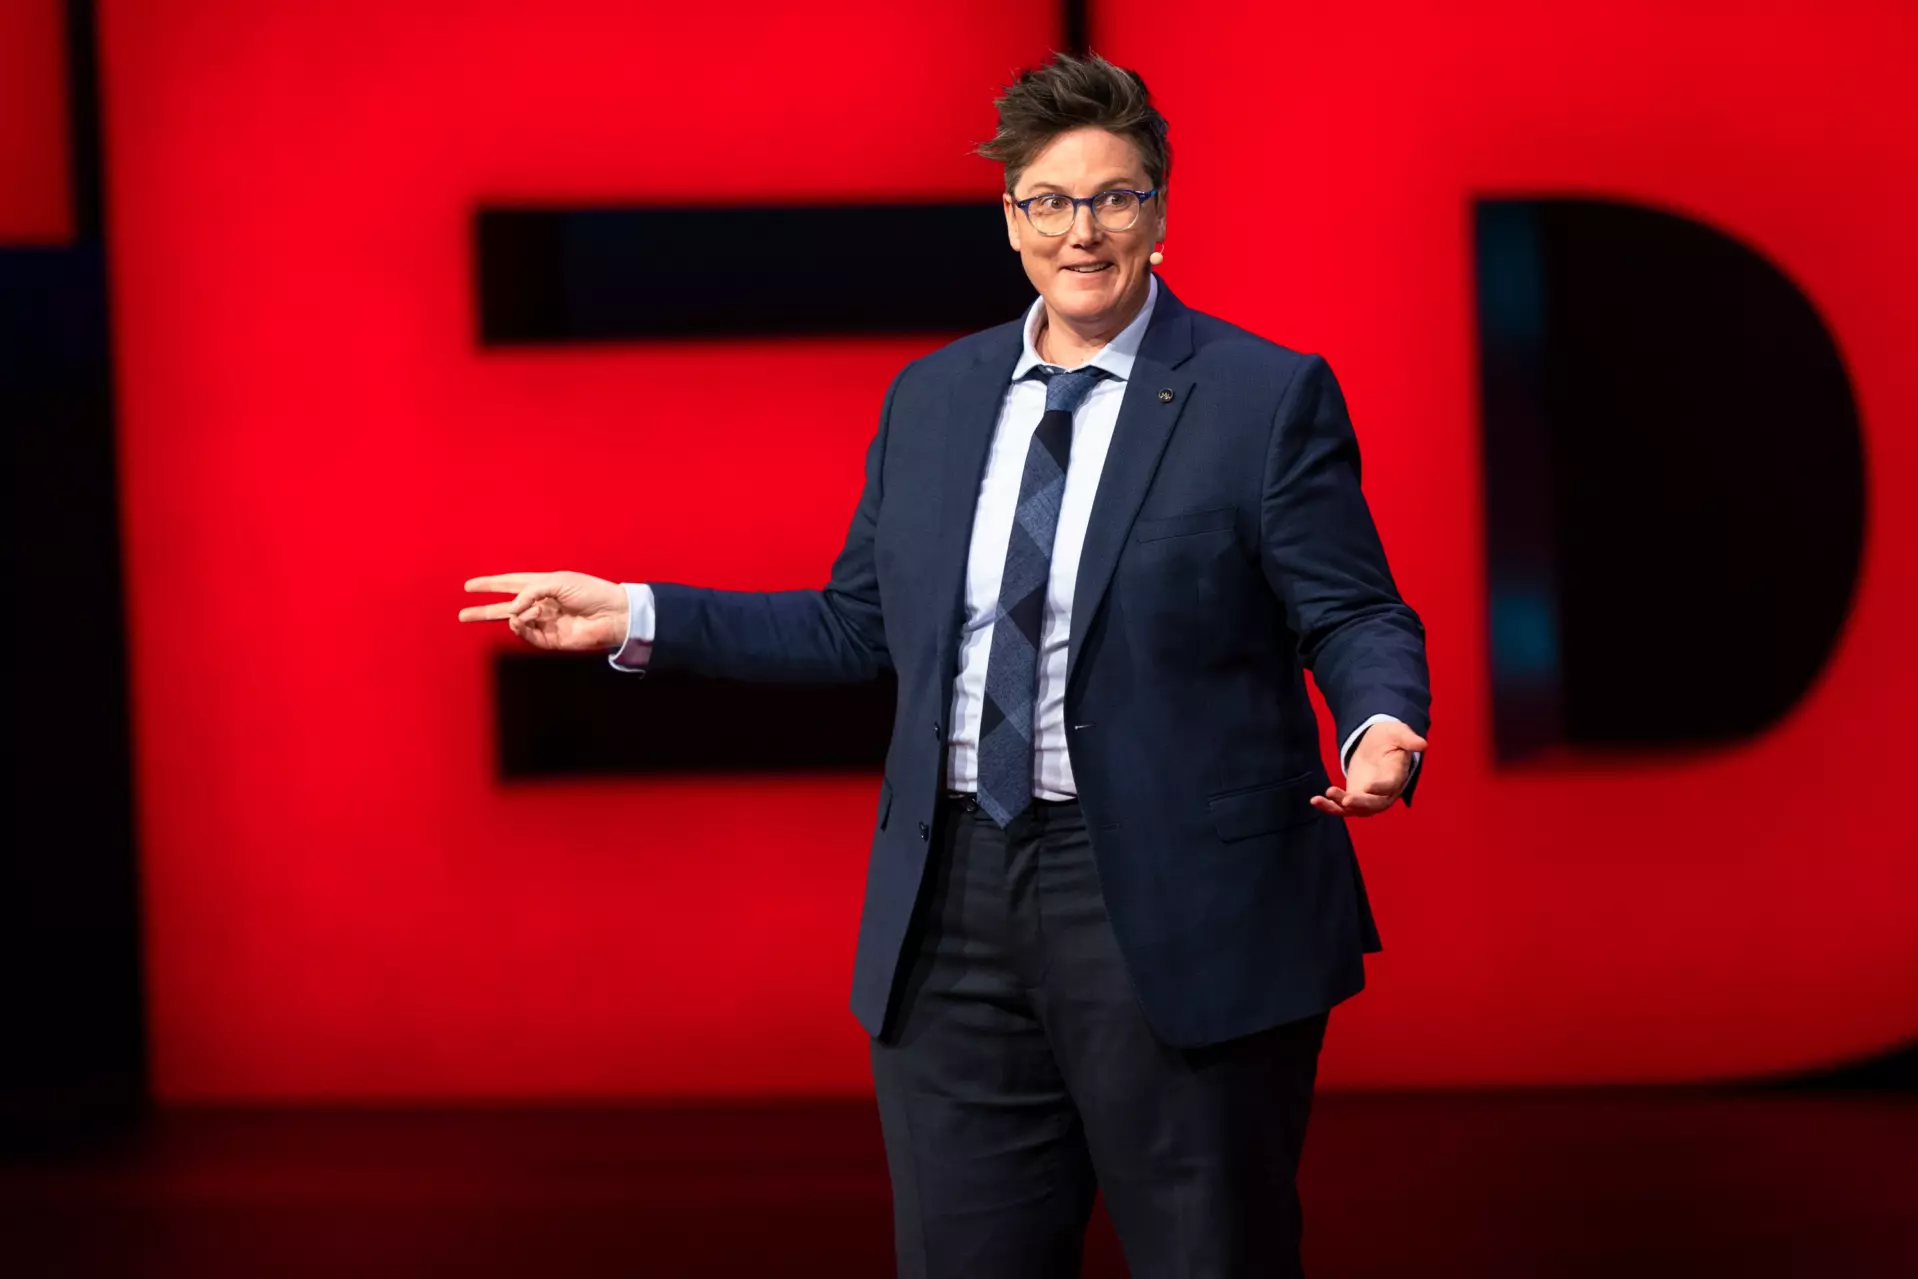 Hannah Gadsby doing a talk or comedy performance at TED